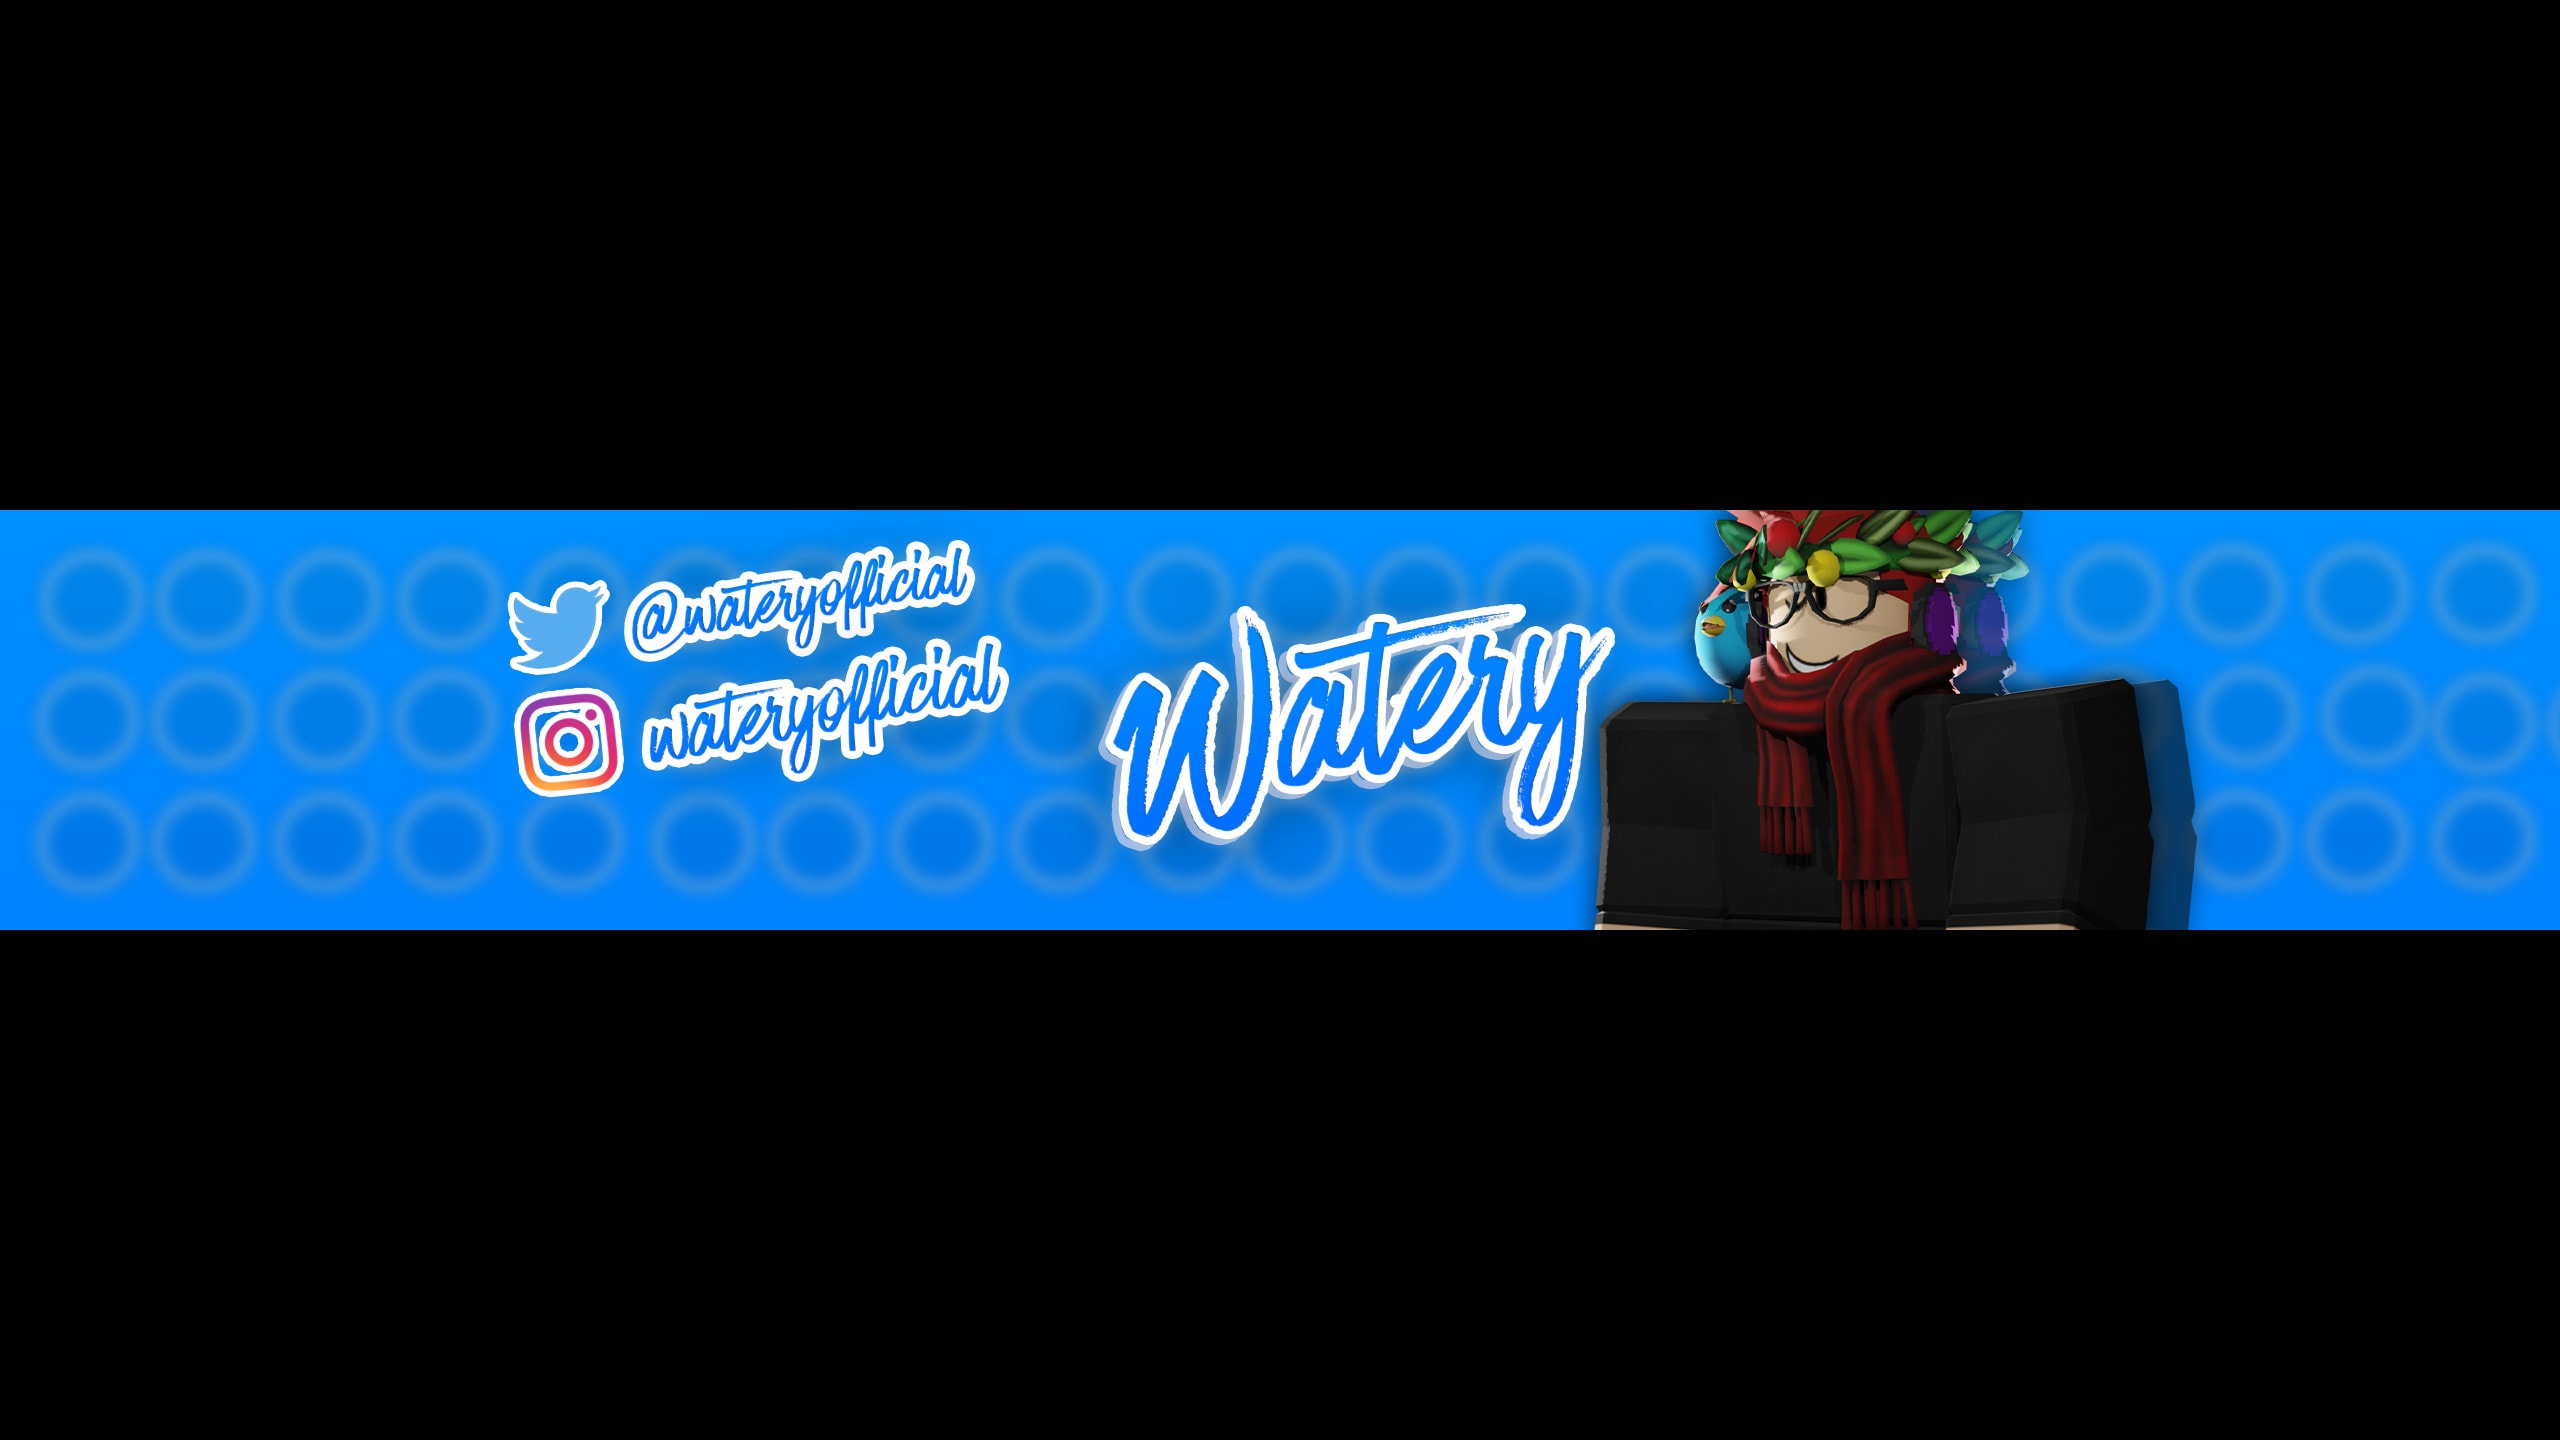 Make A Simple Banner For All Social Medias By Wateryyt - roblox banner background